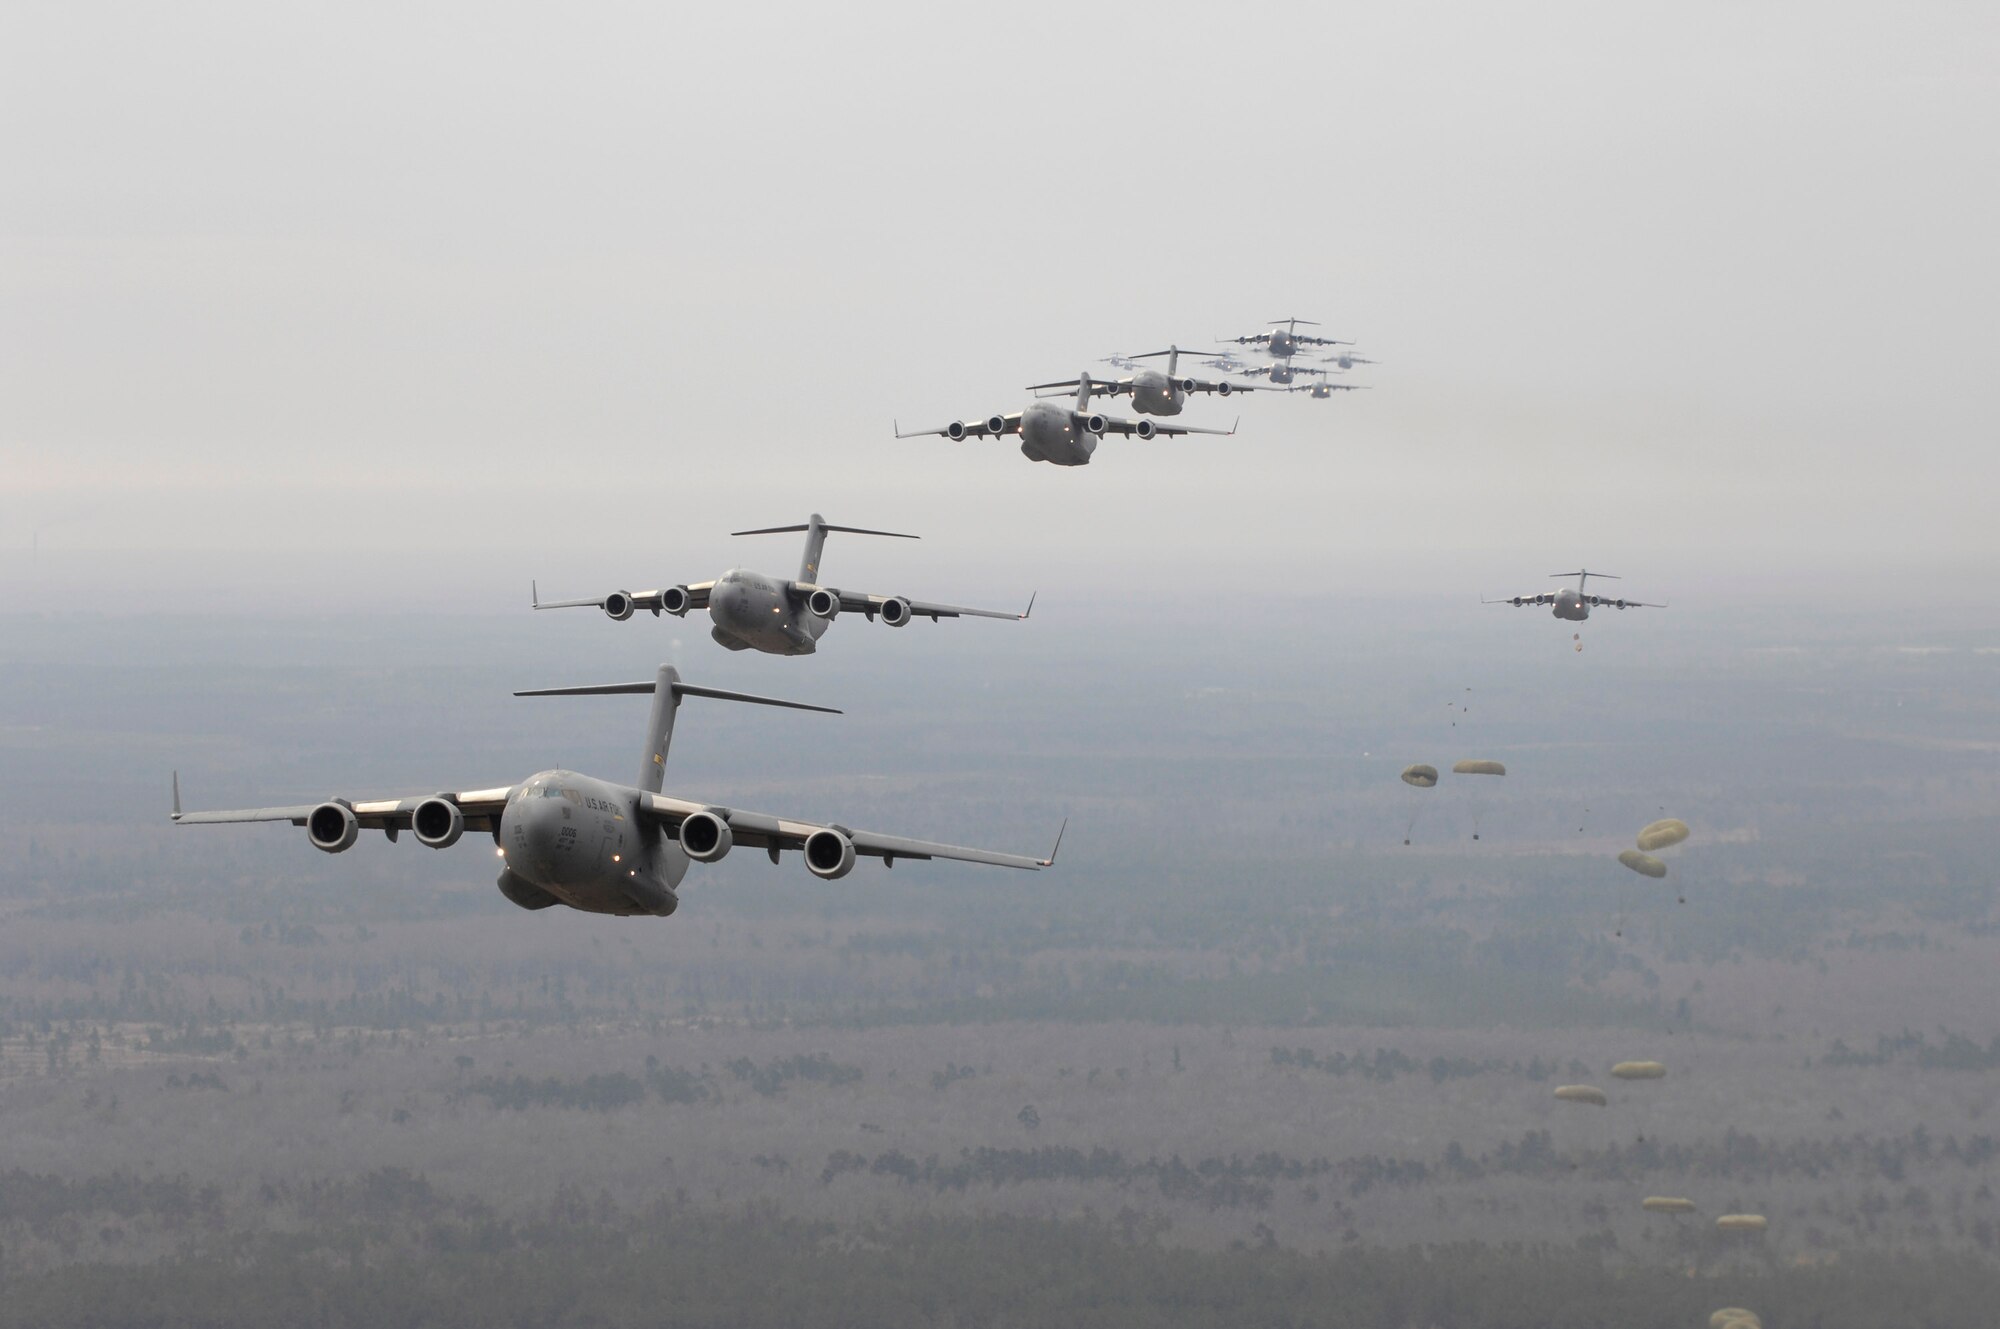 Twenty C-17 Globemaster IIIs participate in the Large Formation Exercise Dec. 21 over the coast of Charleston, S.C. The C-17s, assigned to the 437th and 315th Airlift Wings at Charleston AFB, were part of the largest formation in history from a single base and demonstrated the strategic airdrop capability of the Air Force. (U.S. Air Force photo/Master Sgt. Andy Dunaway)